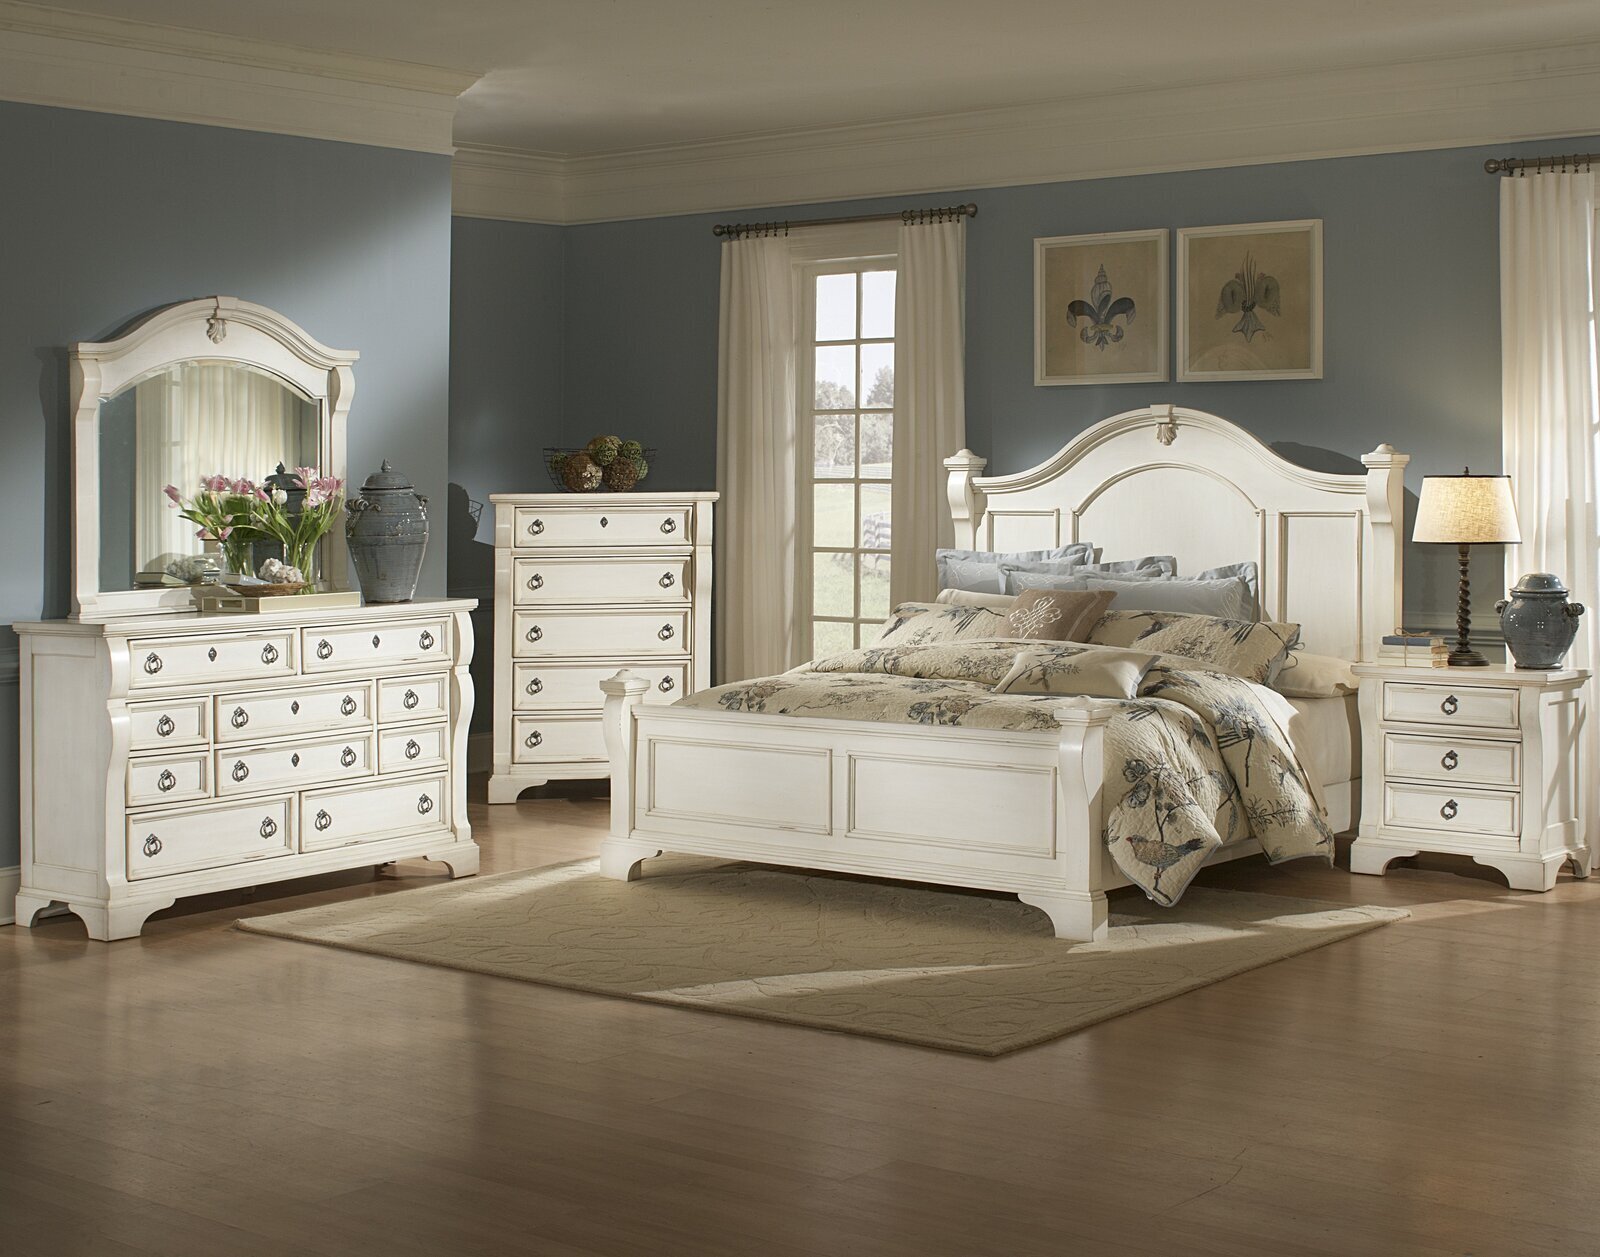 Old fashioned bedroom set with a classy, French look